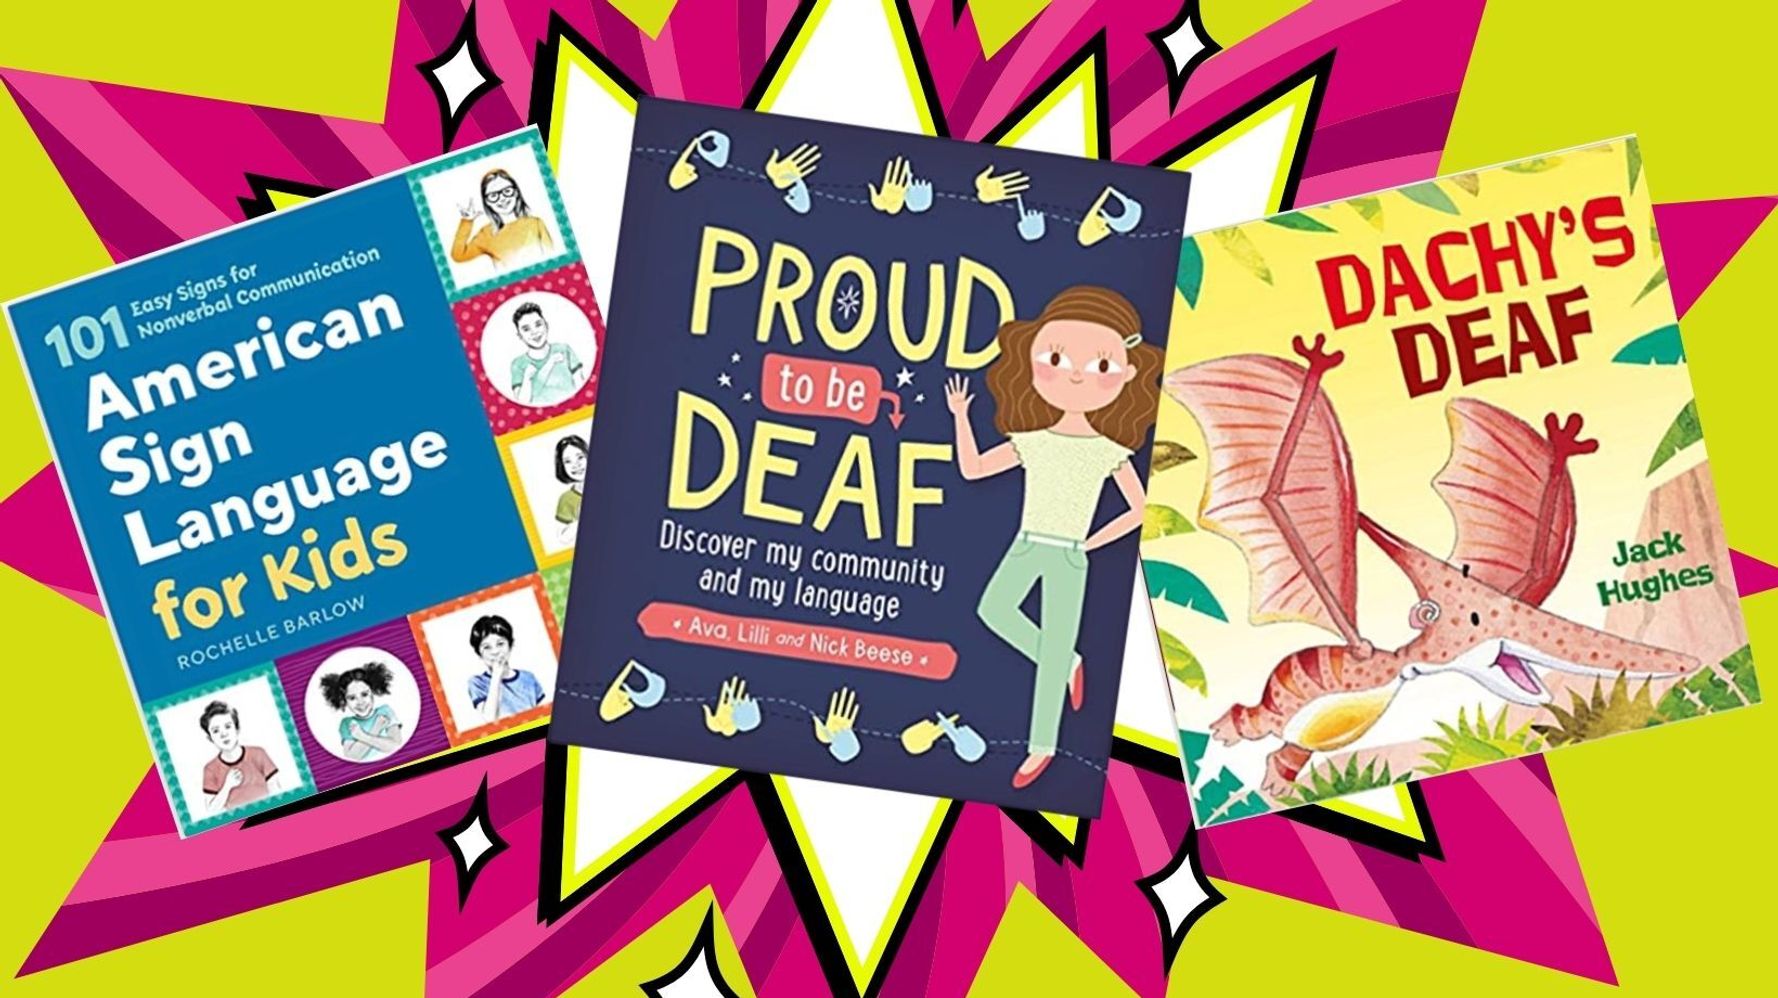 Now Is A Great Time To Teach Your Kid About What It's Like To Be Deaf